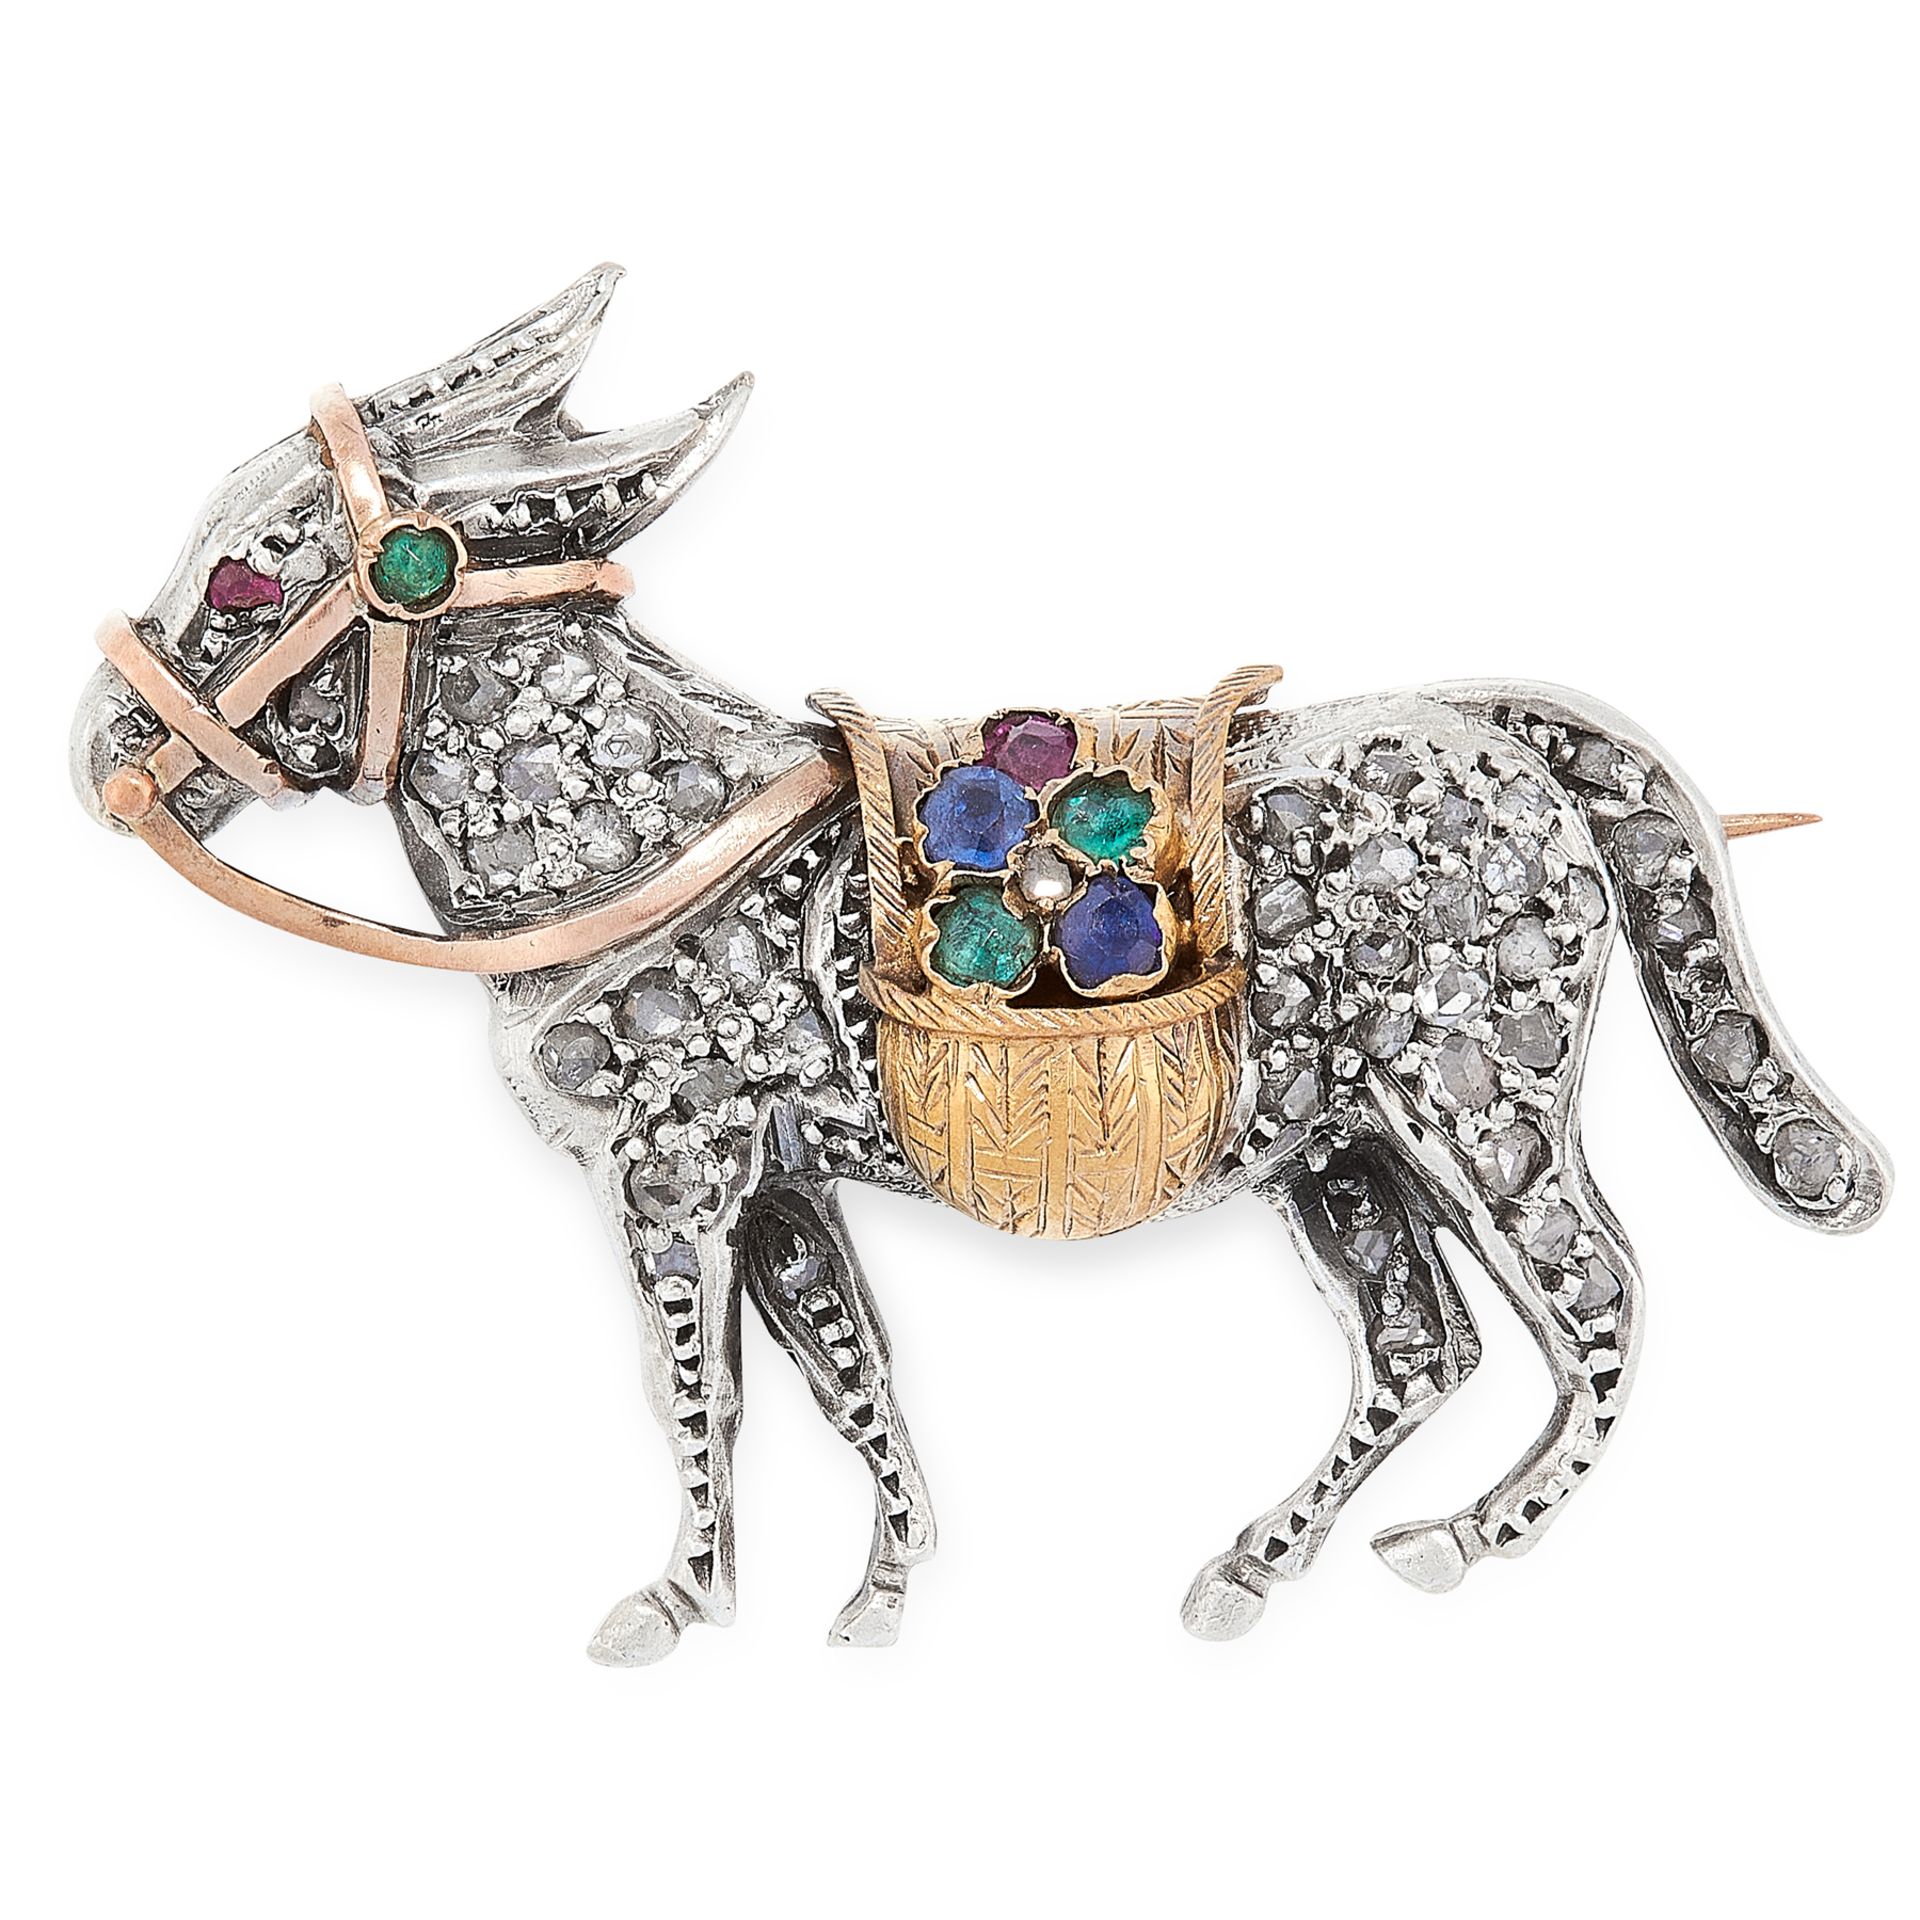 AN ANTIQUE GEMSET DONKEY BROOCH, 19TH CENTURY in yellow gold and silver, designed as a donkey /